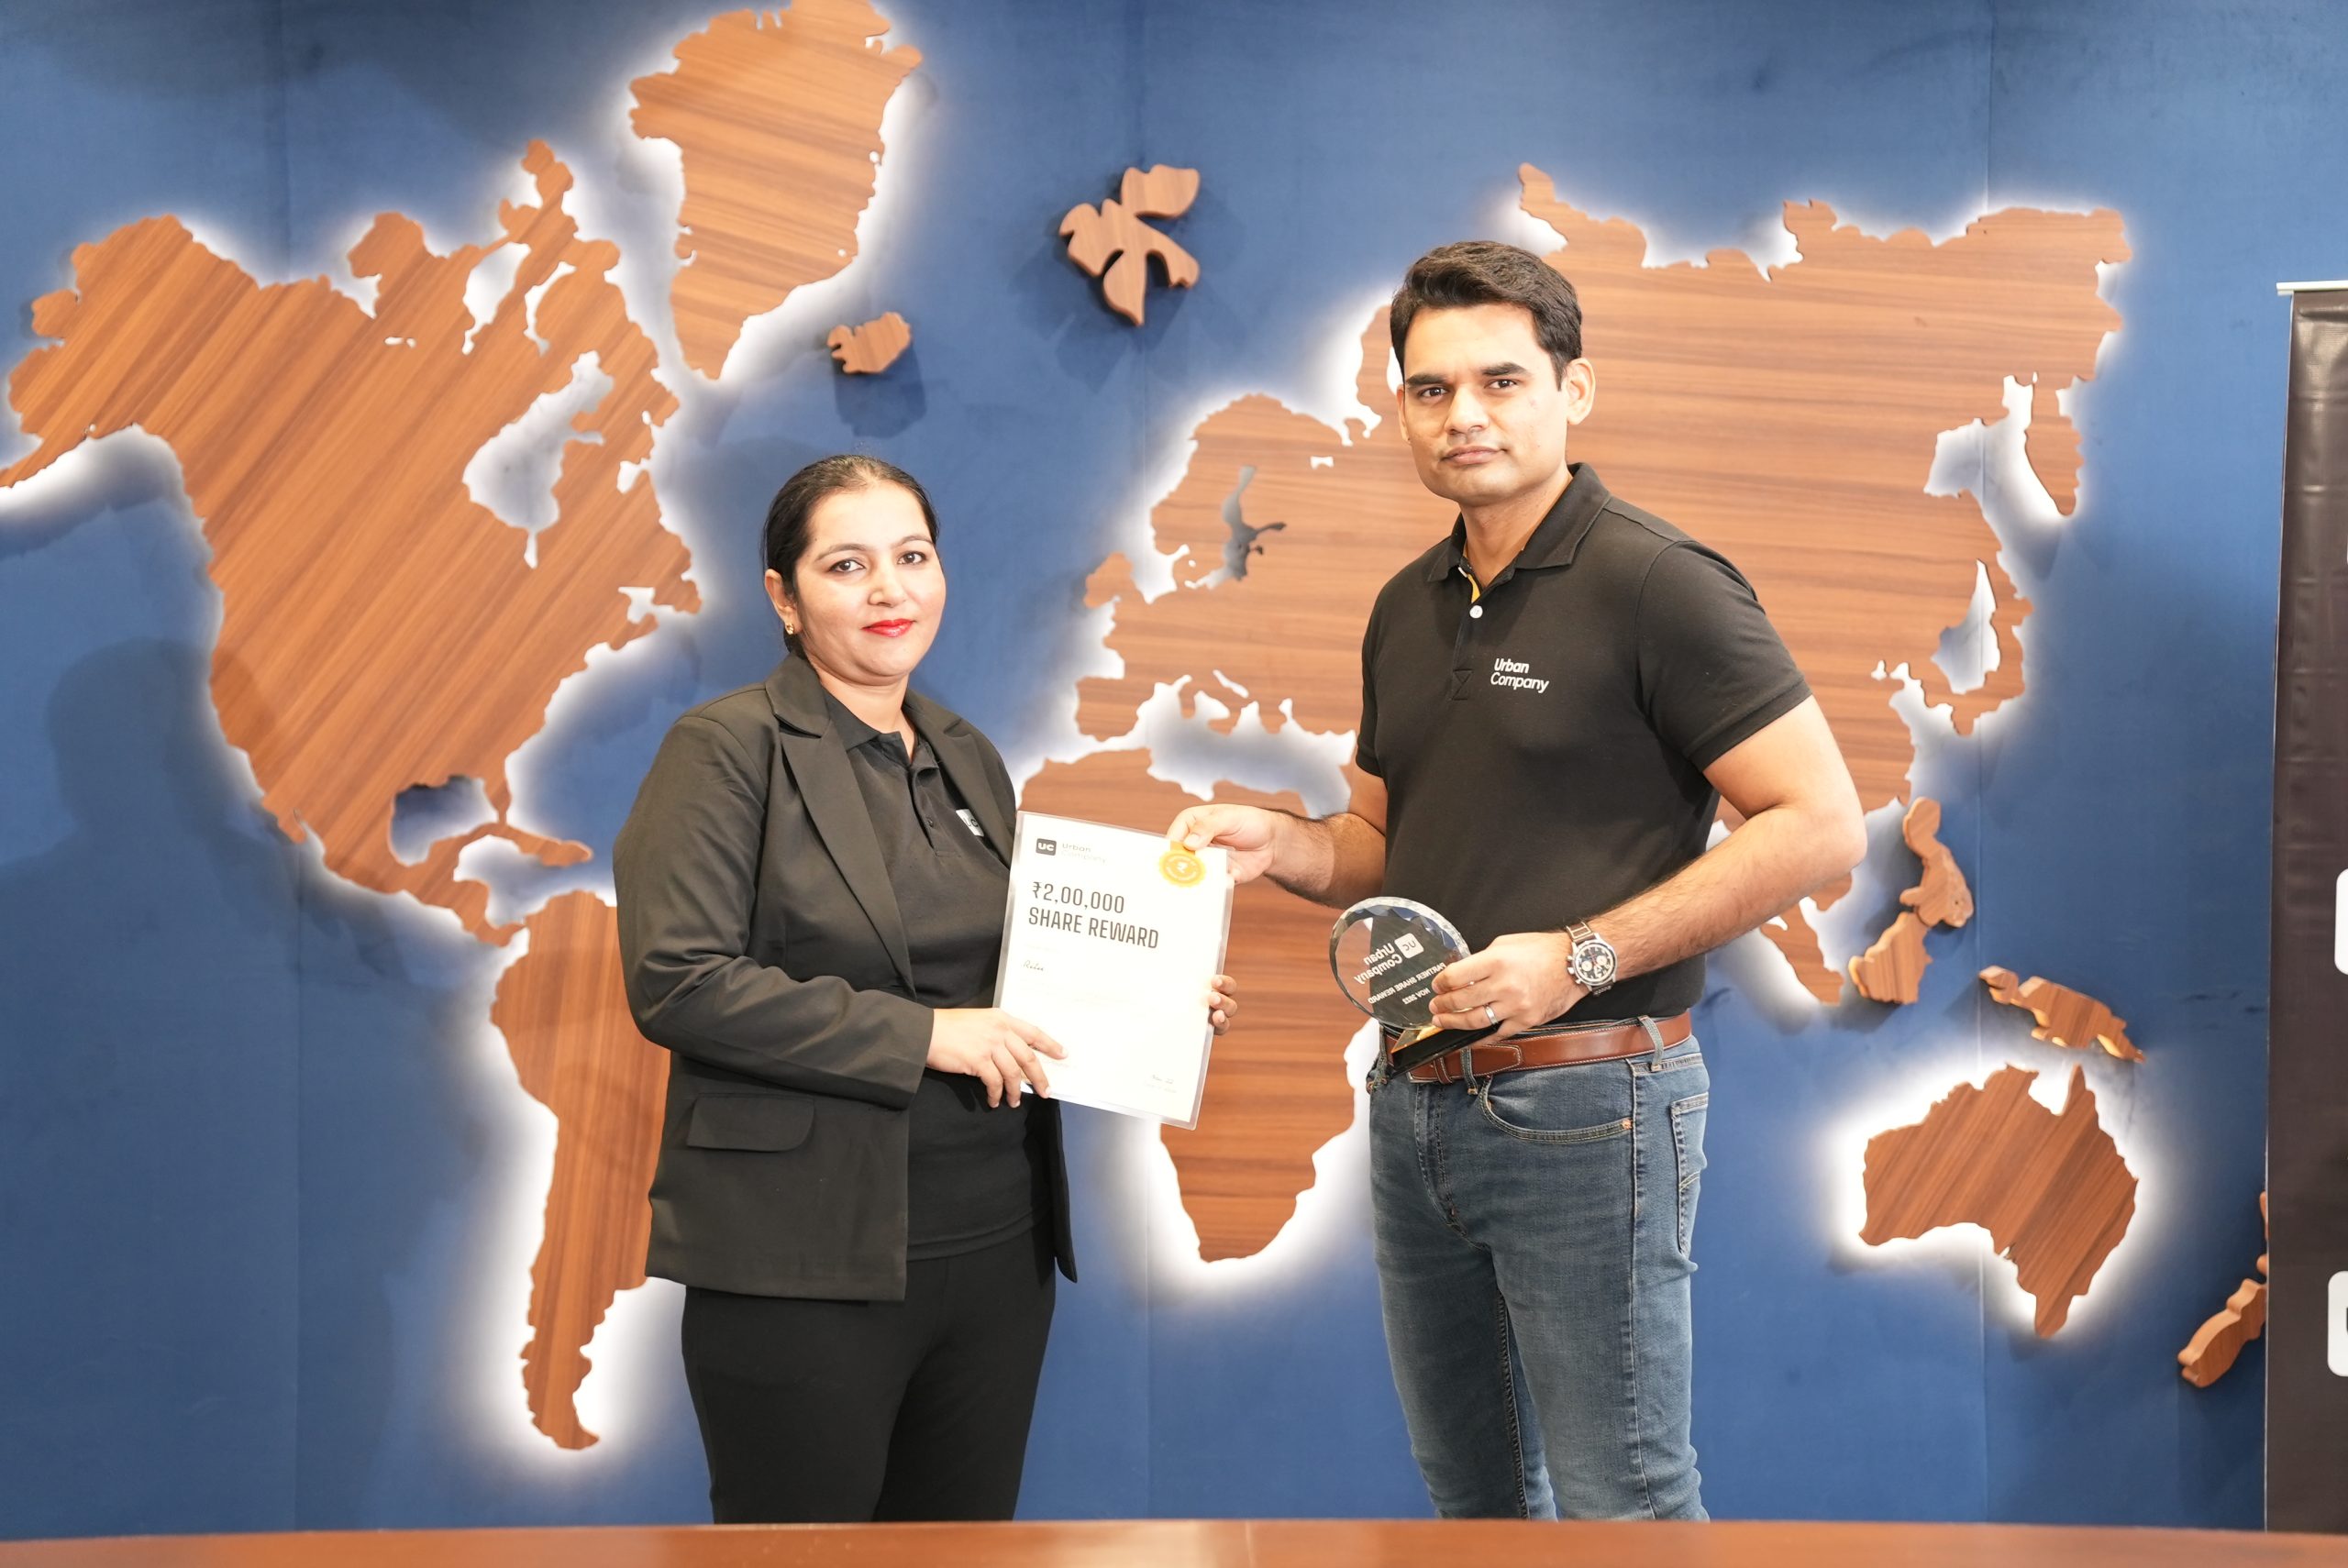 Ritu receiving her PSOP award from Urban Company's CEO and Co-founder, Abhiraj Singh Bhal